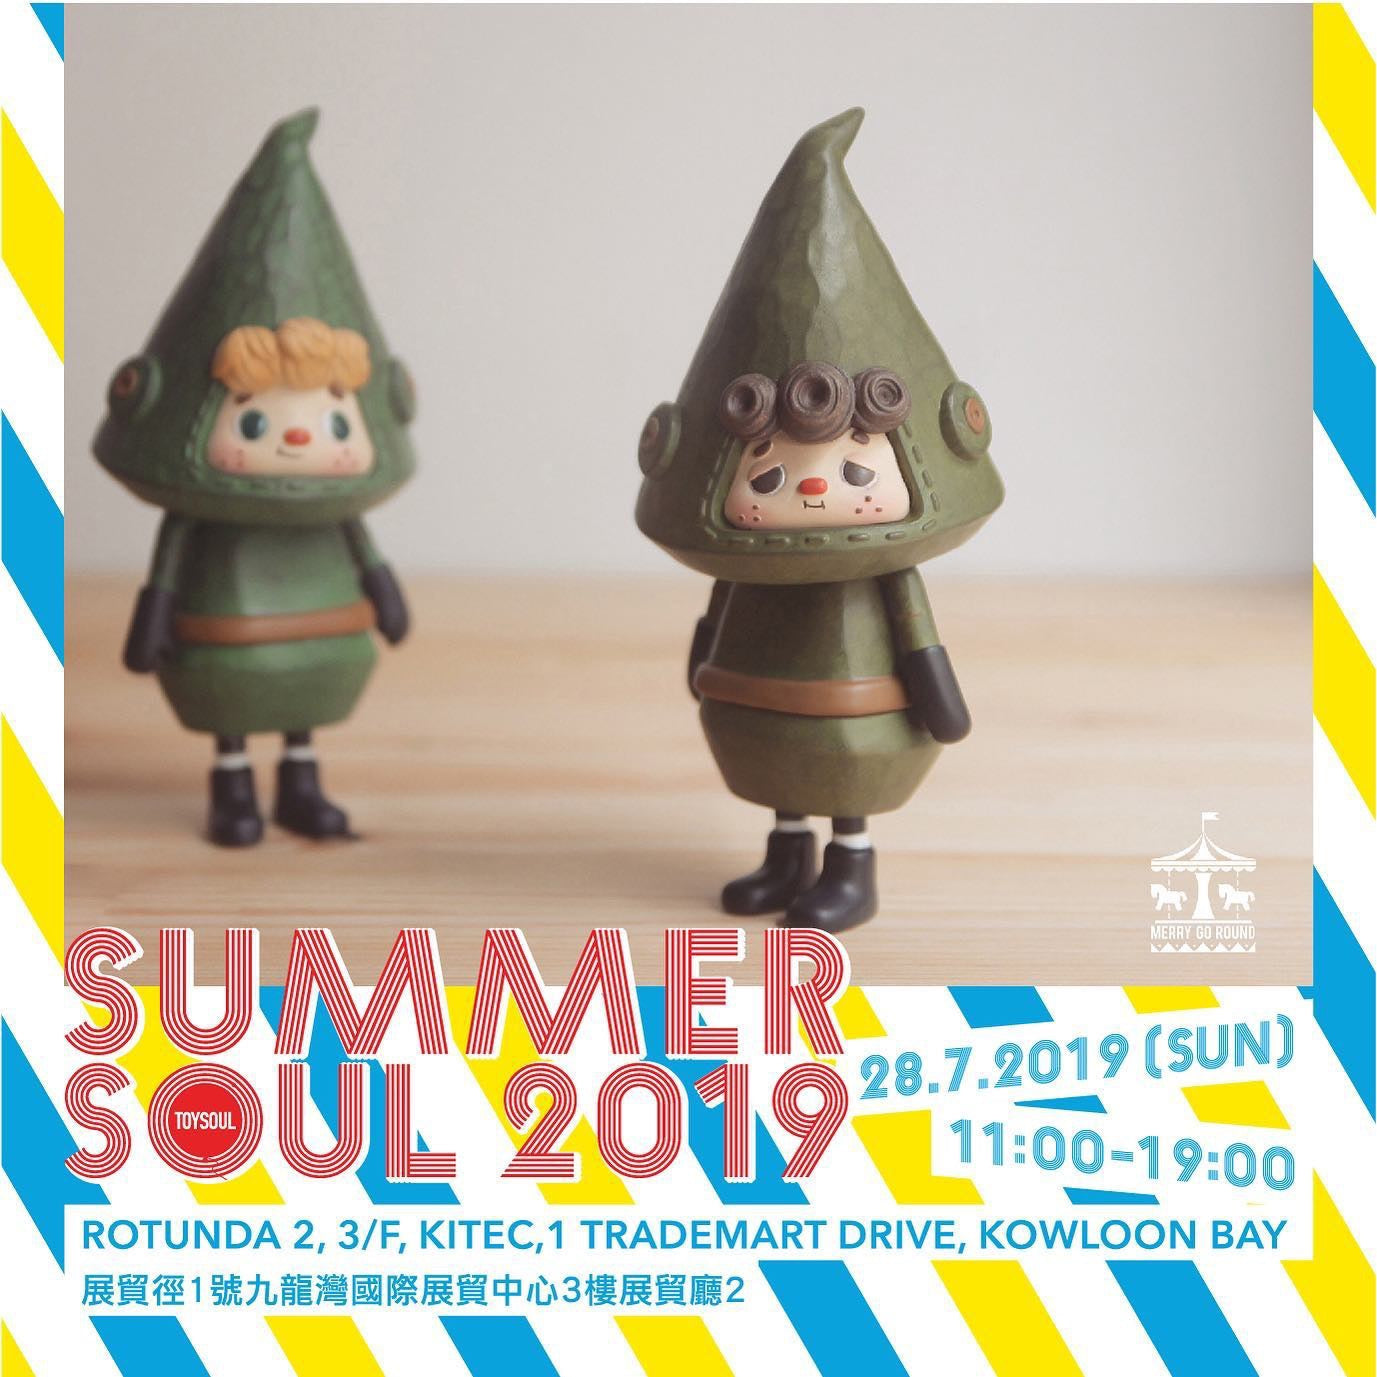 Toy figurines by MERRY GO ROUND Toys, featuring Lil' Letter Elf - Olive by Two Hands Studio x MGR.